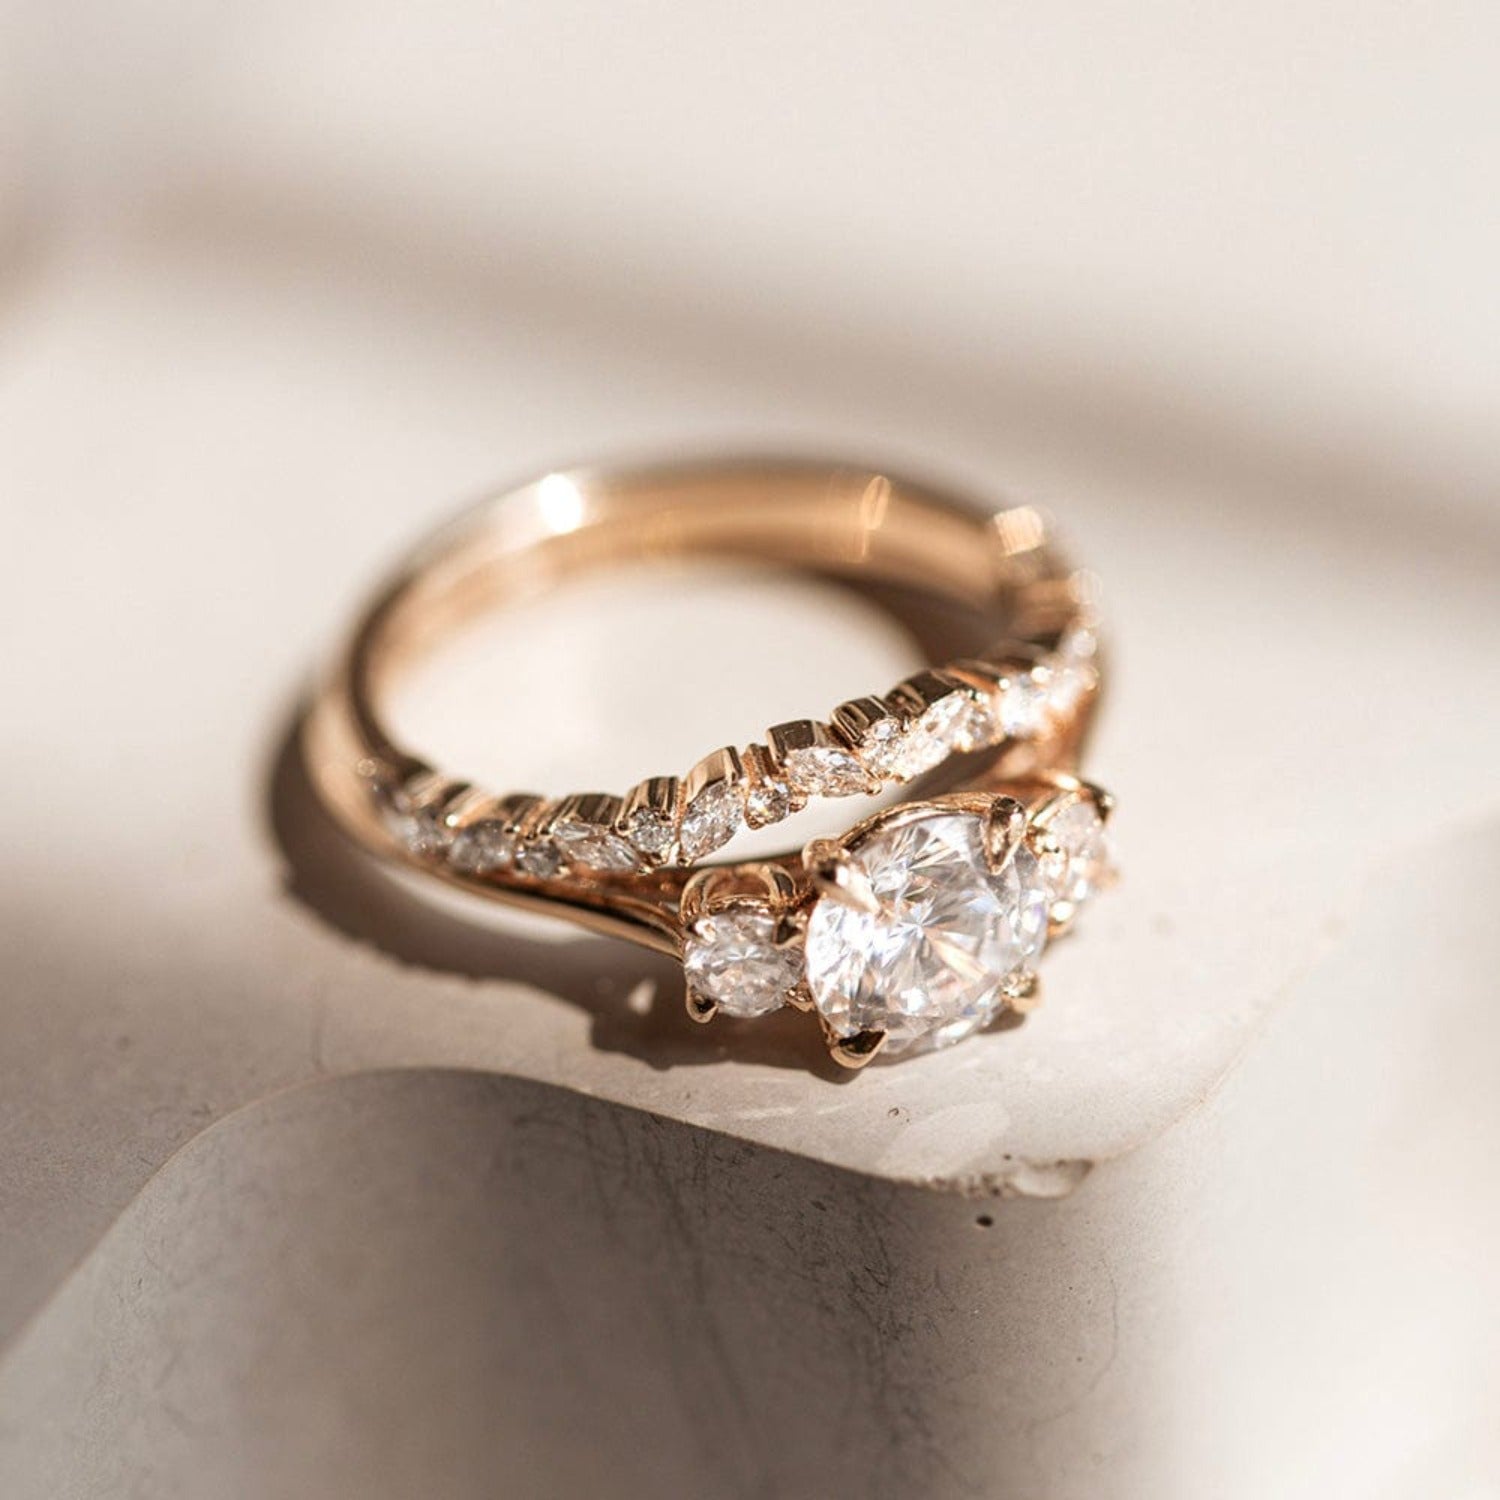 Virginia Engagement Ring Laws: Who Keeps the Ring After a Breakup?